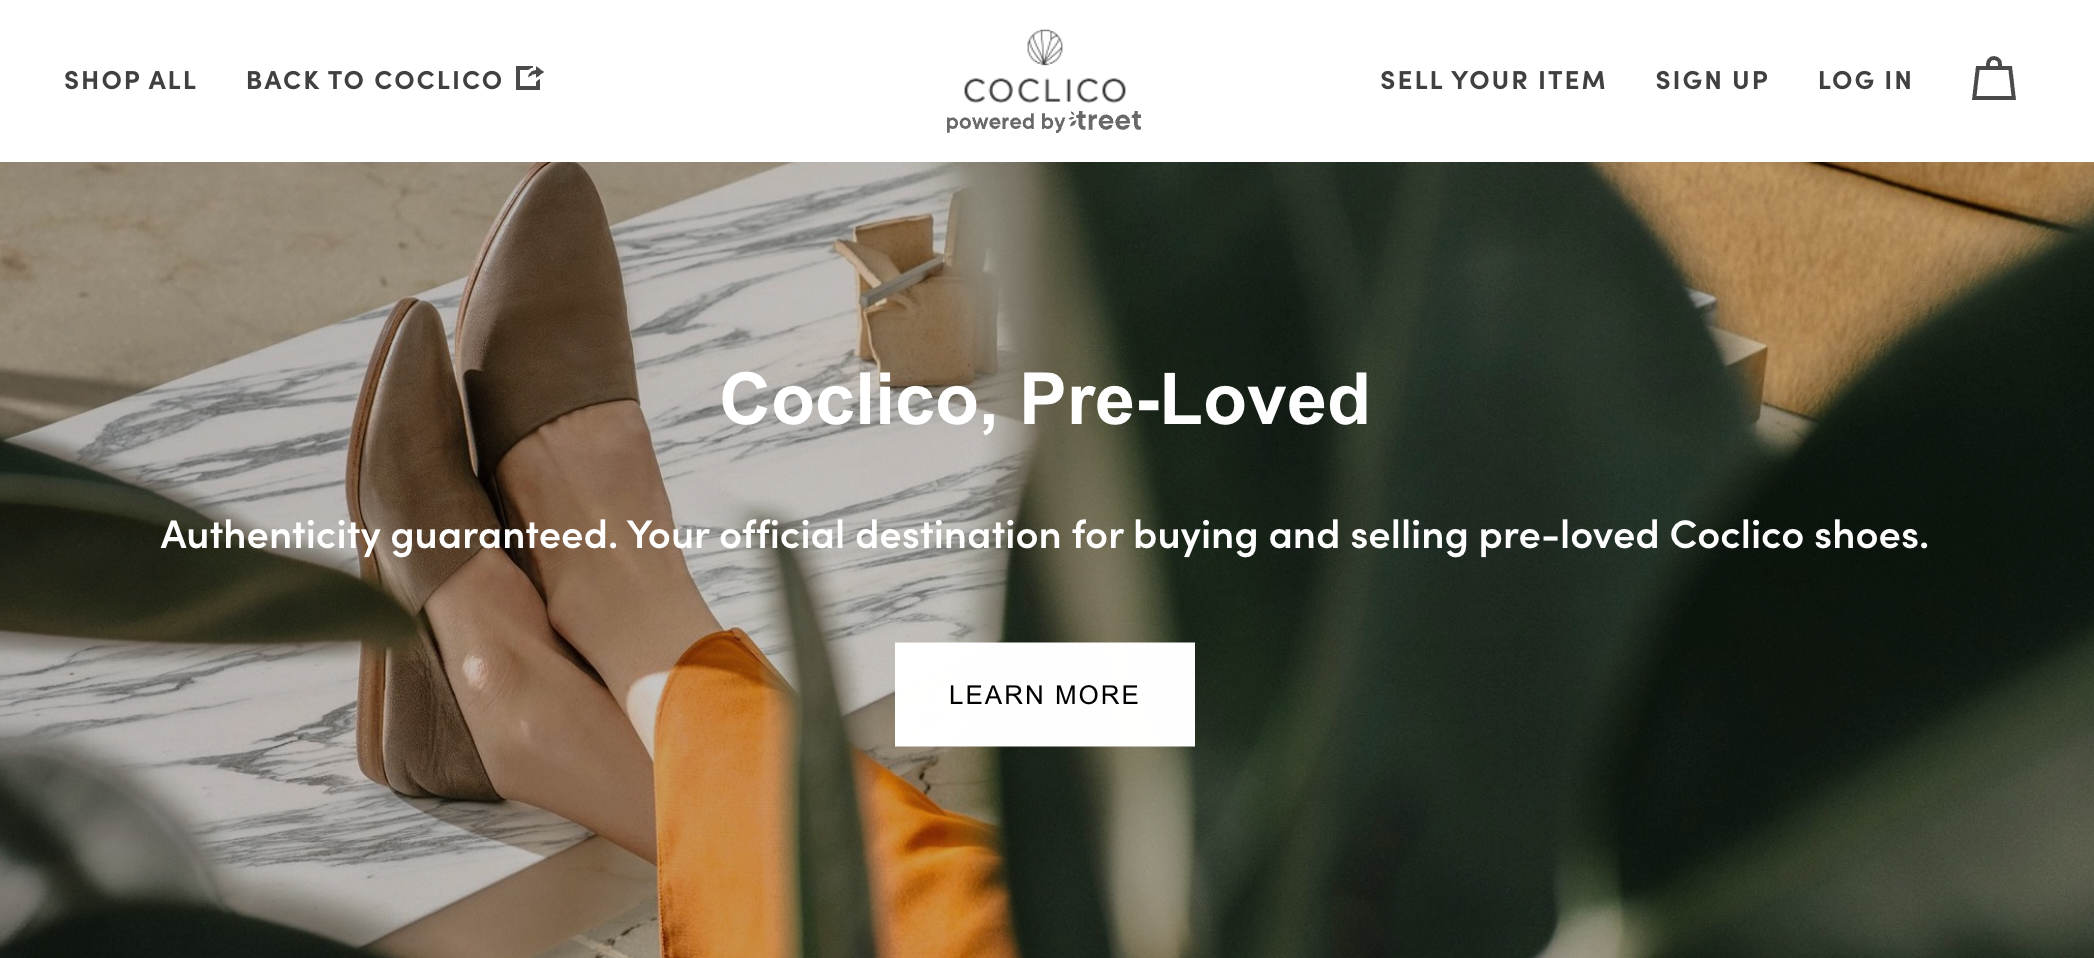 Coclico's pre-loved section